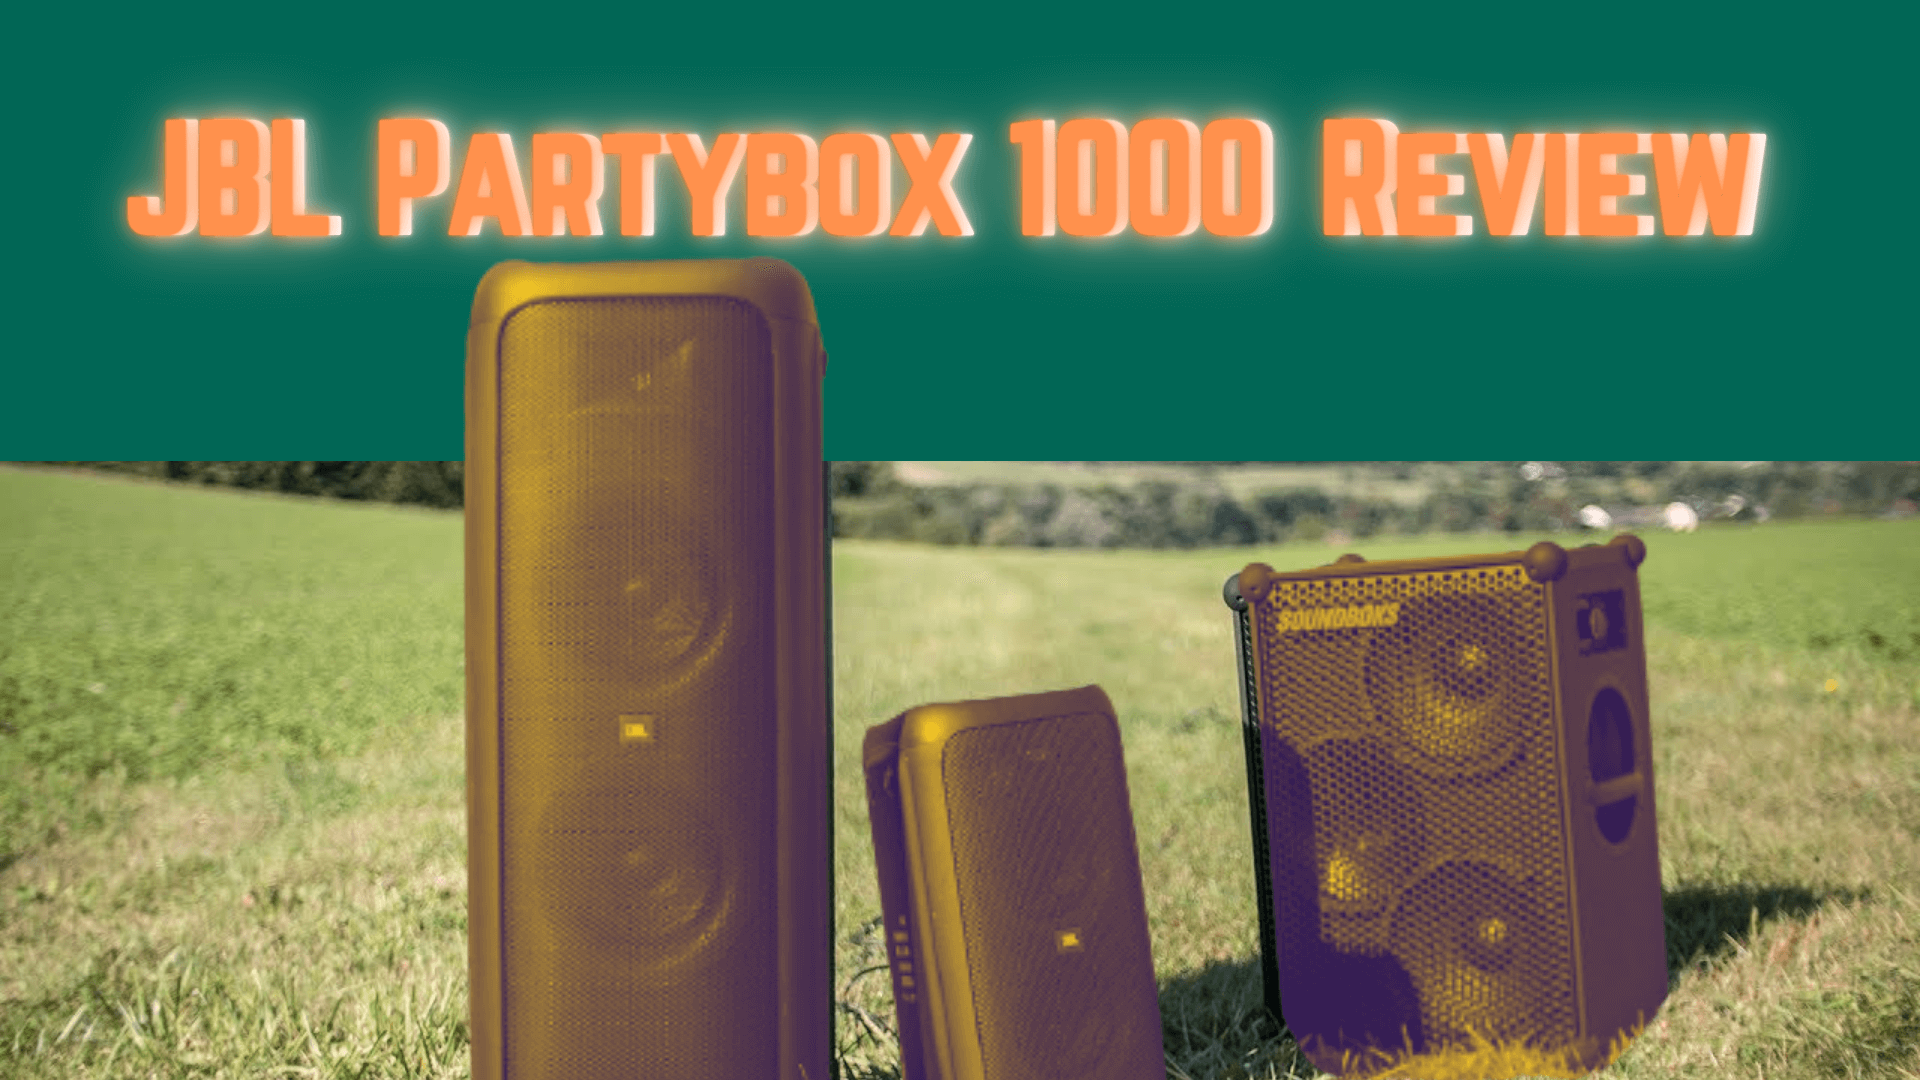 JBL Partybox 1000 Review